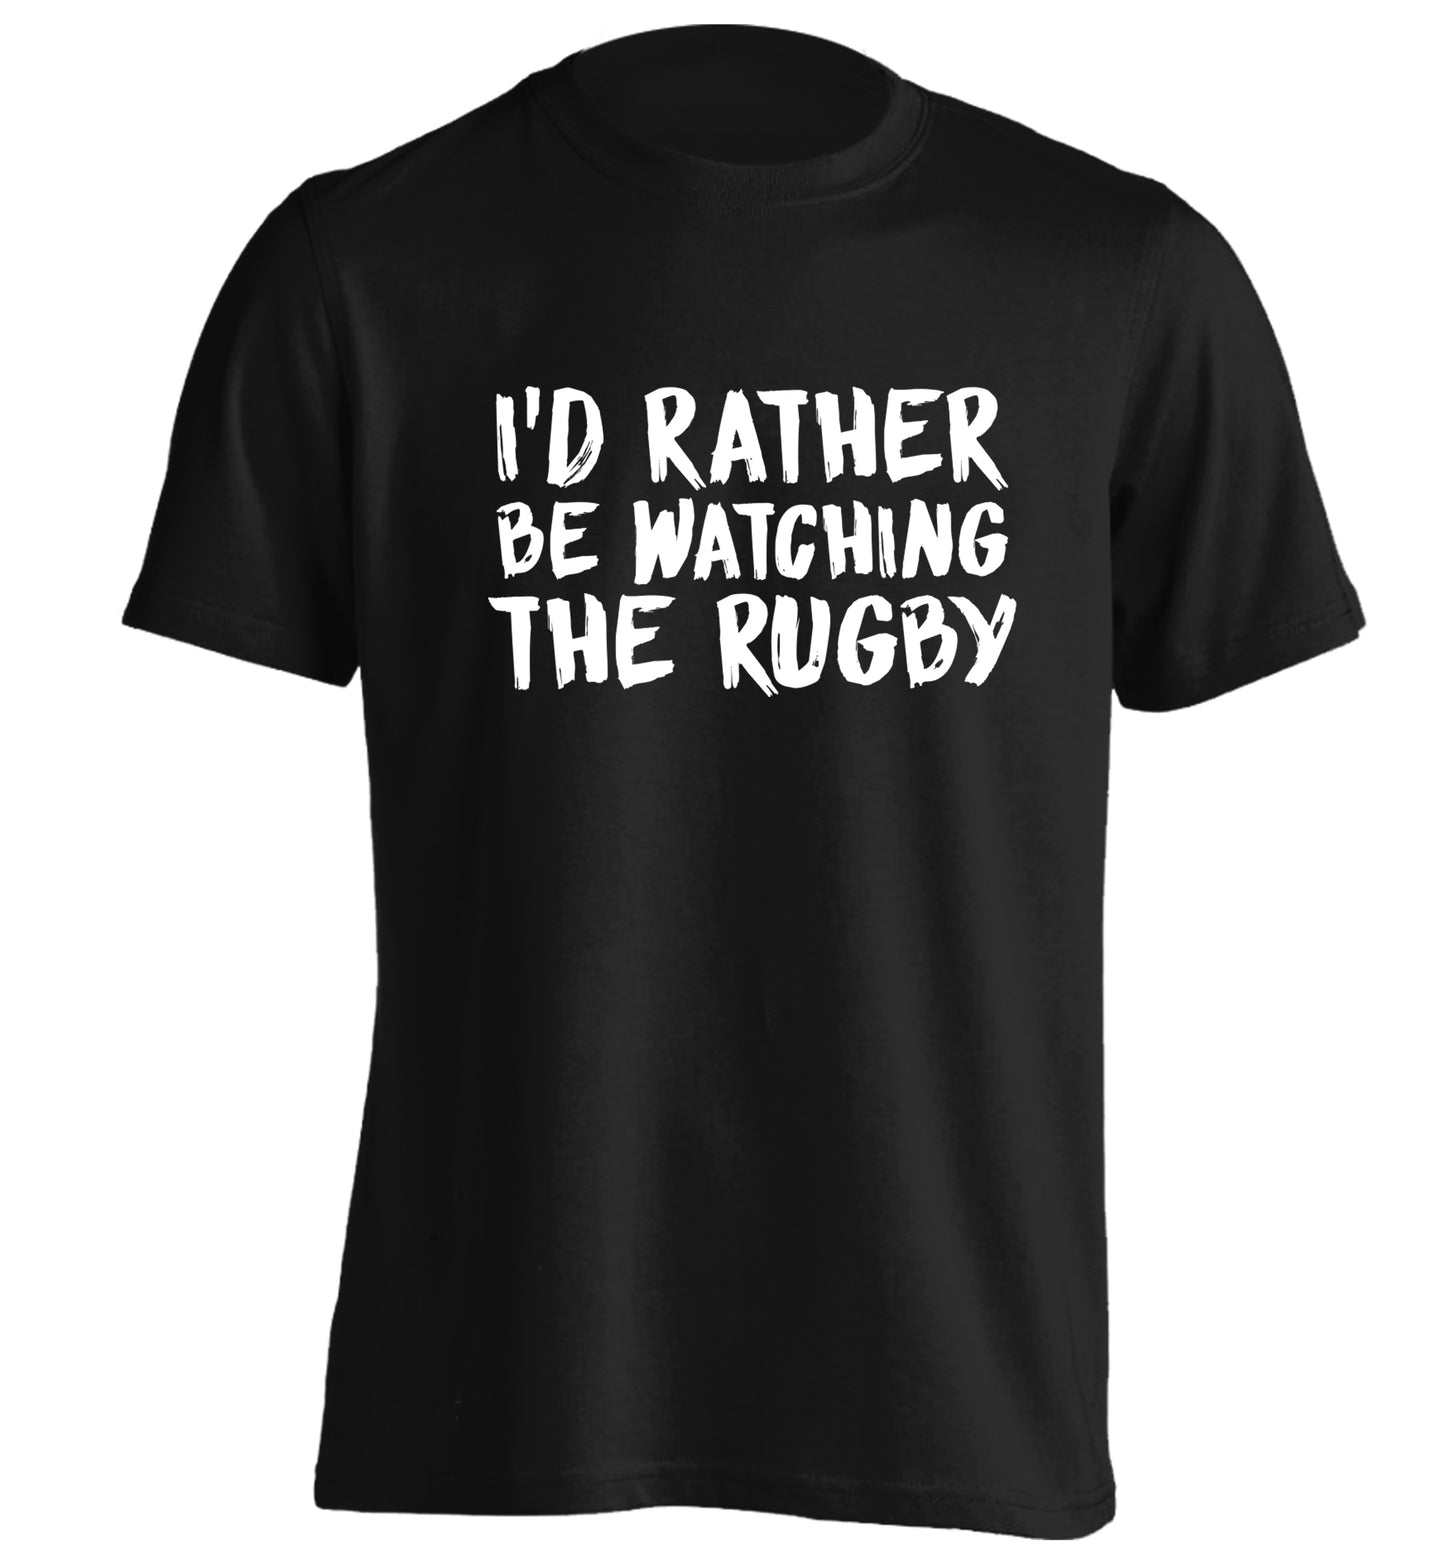 I'd rather be watching the rugby adults unisex black Tshirt 2XL